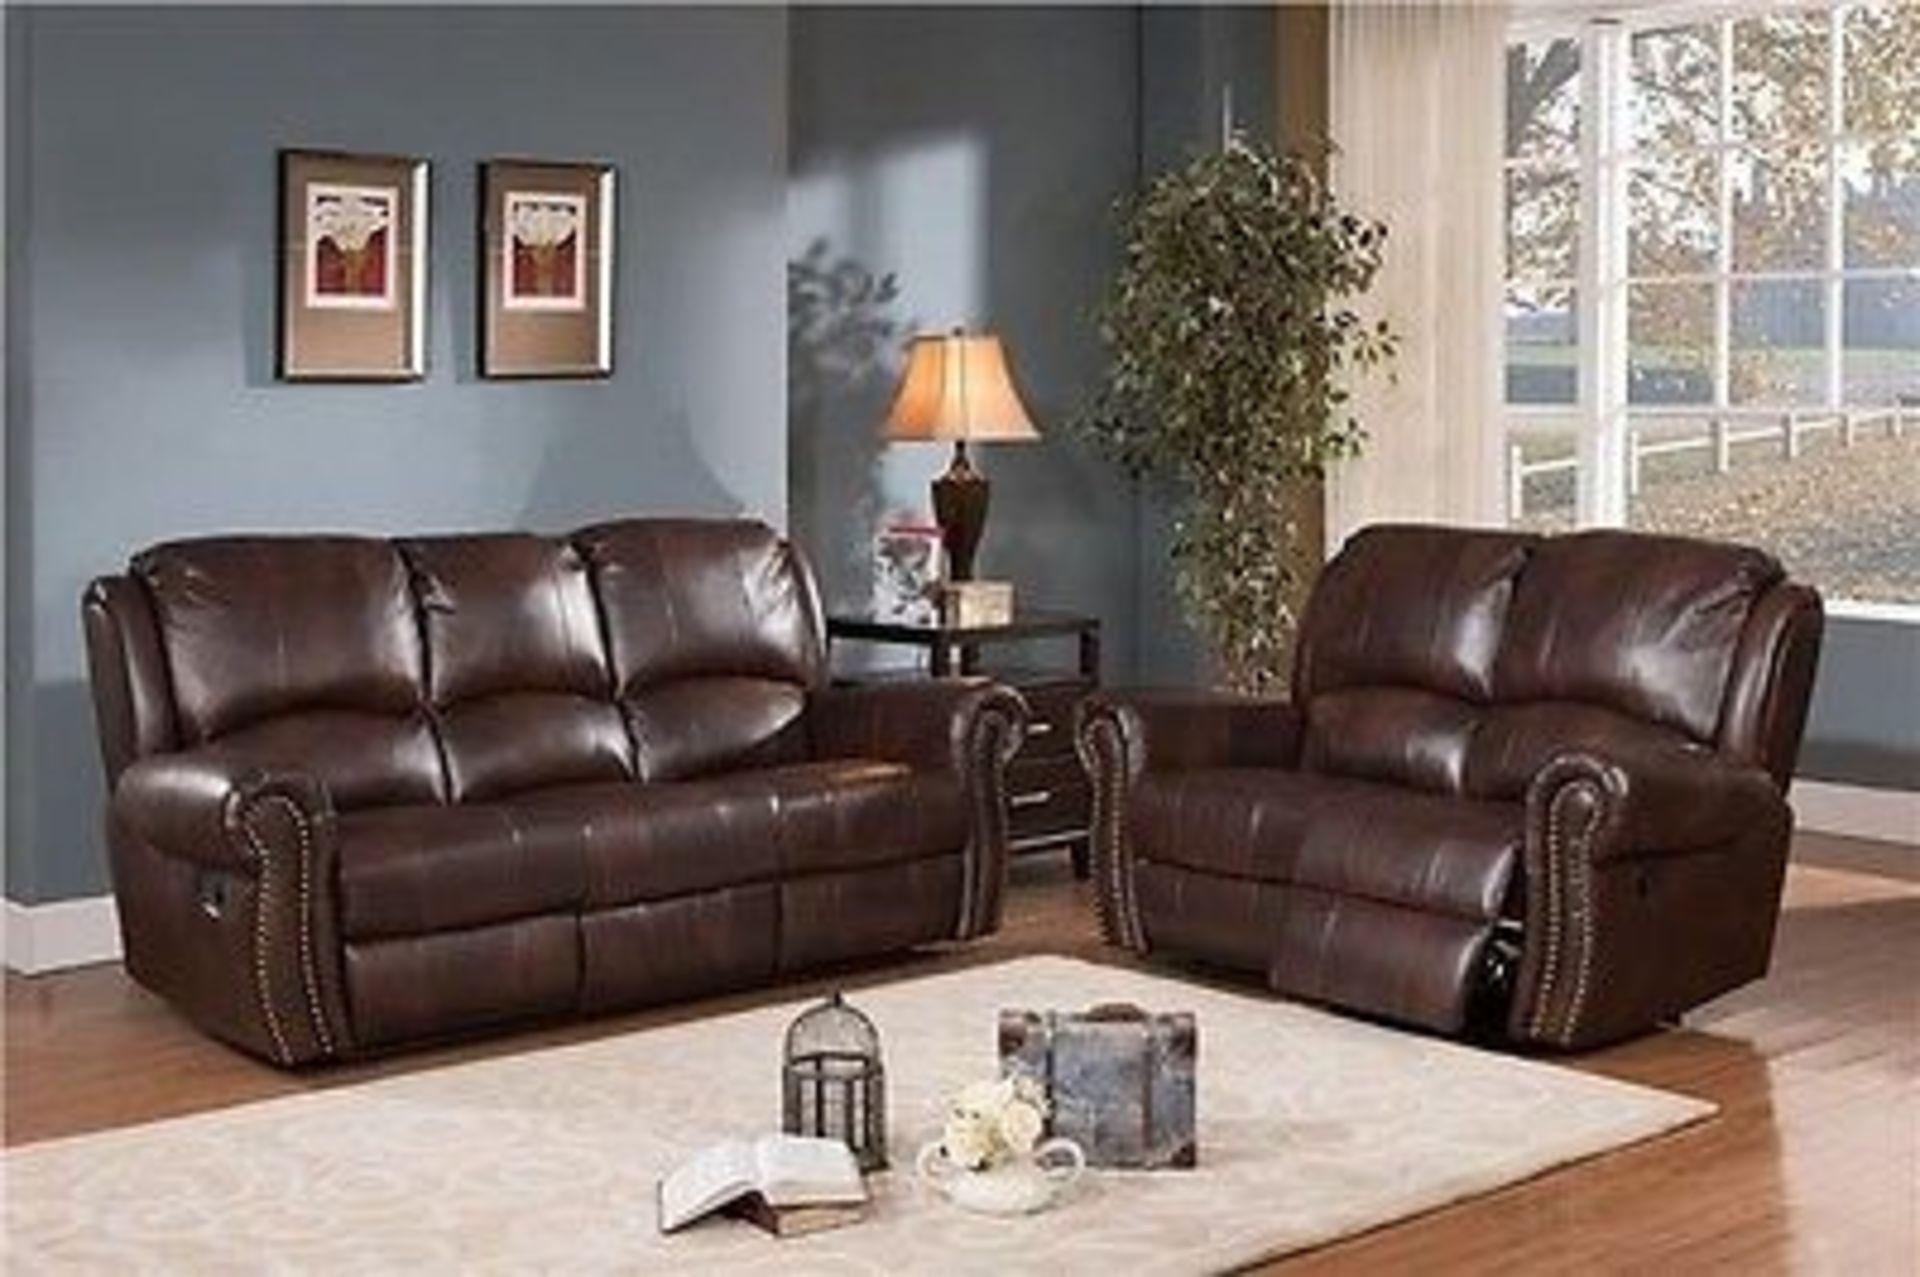 Brand New 3 Seater Plus 2 Seater Salisbury Deluxe Brown Leather Reclining Sofas